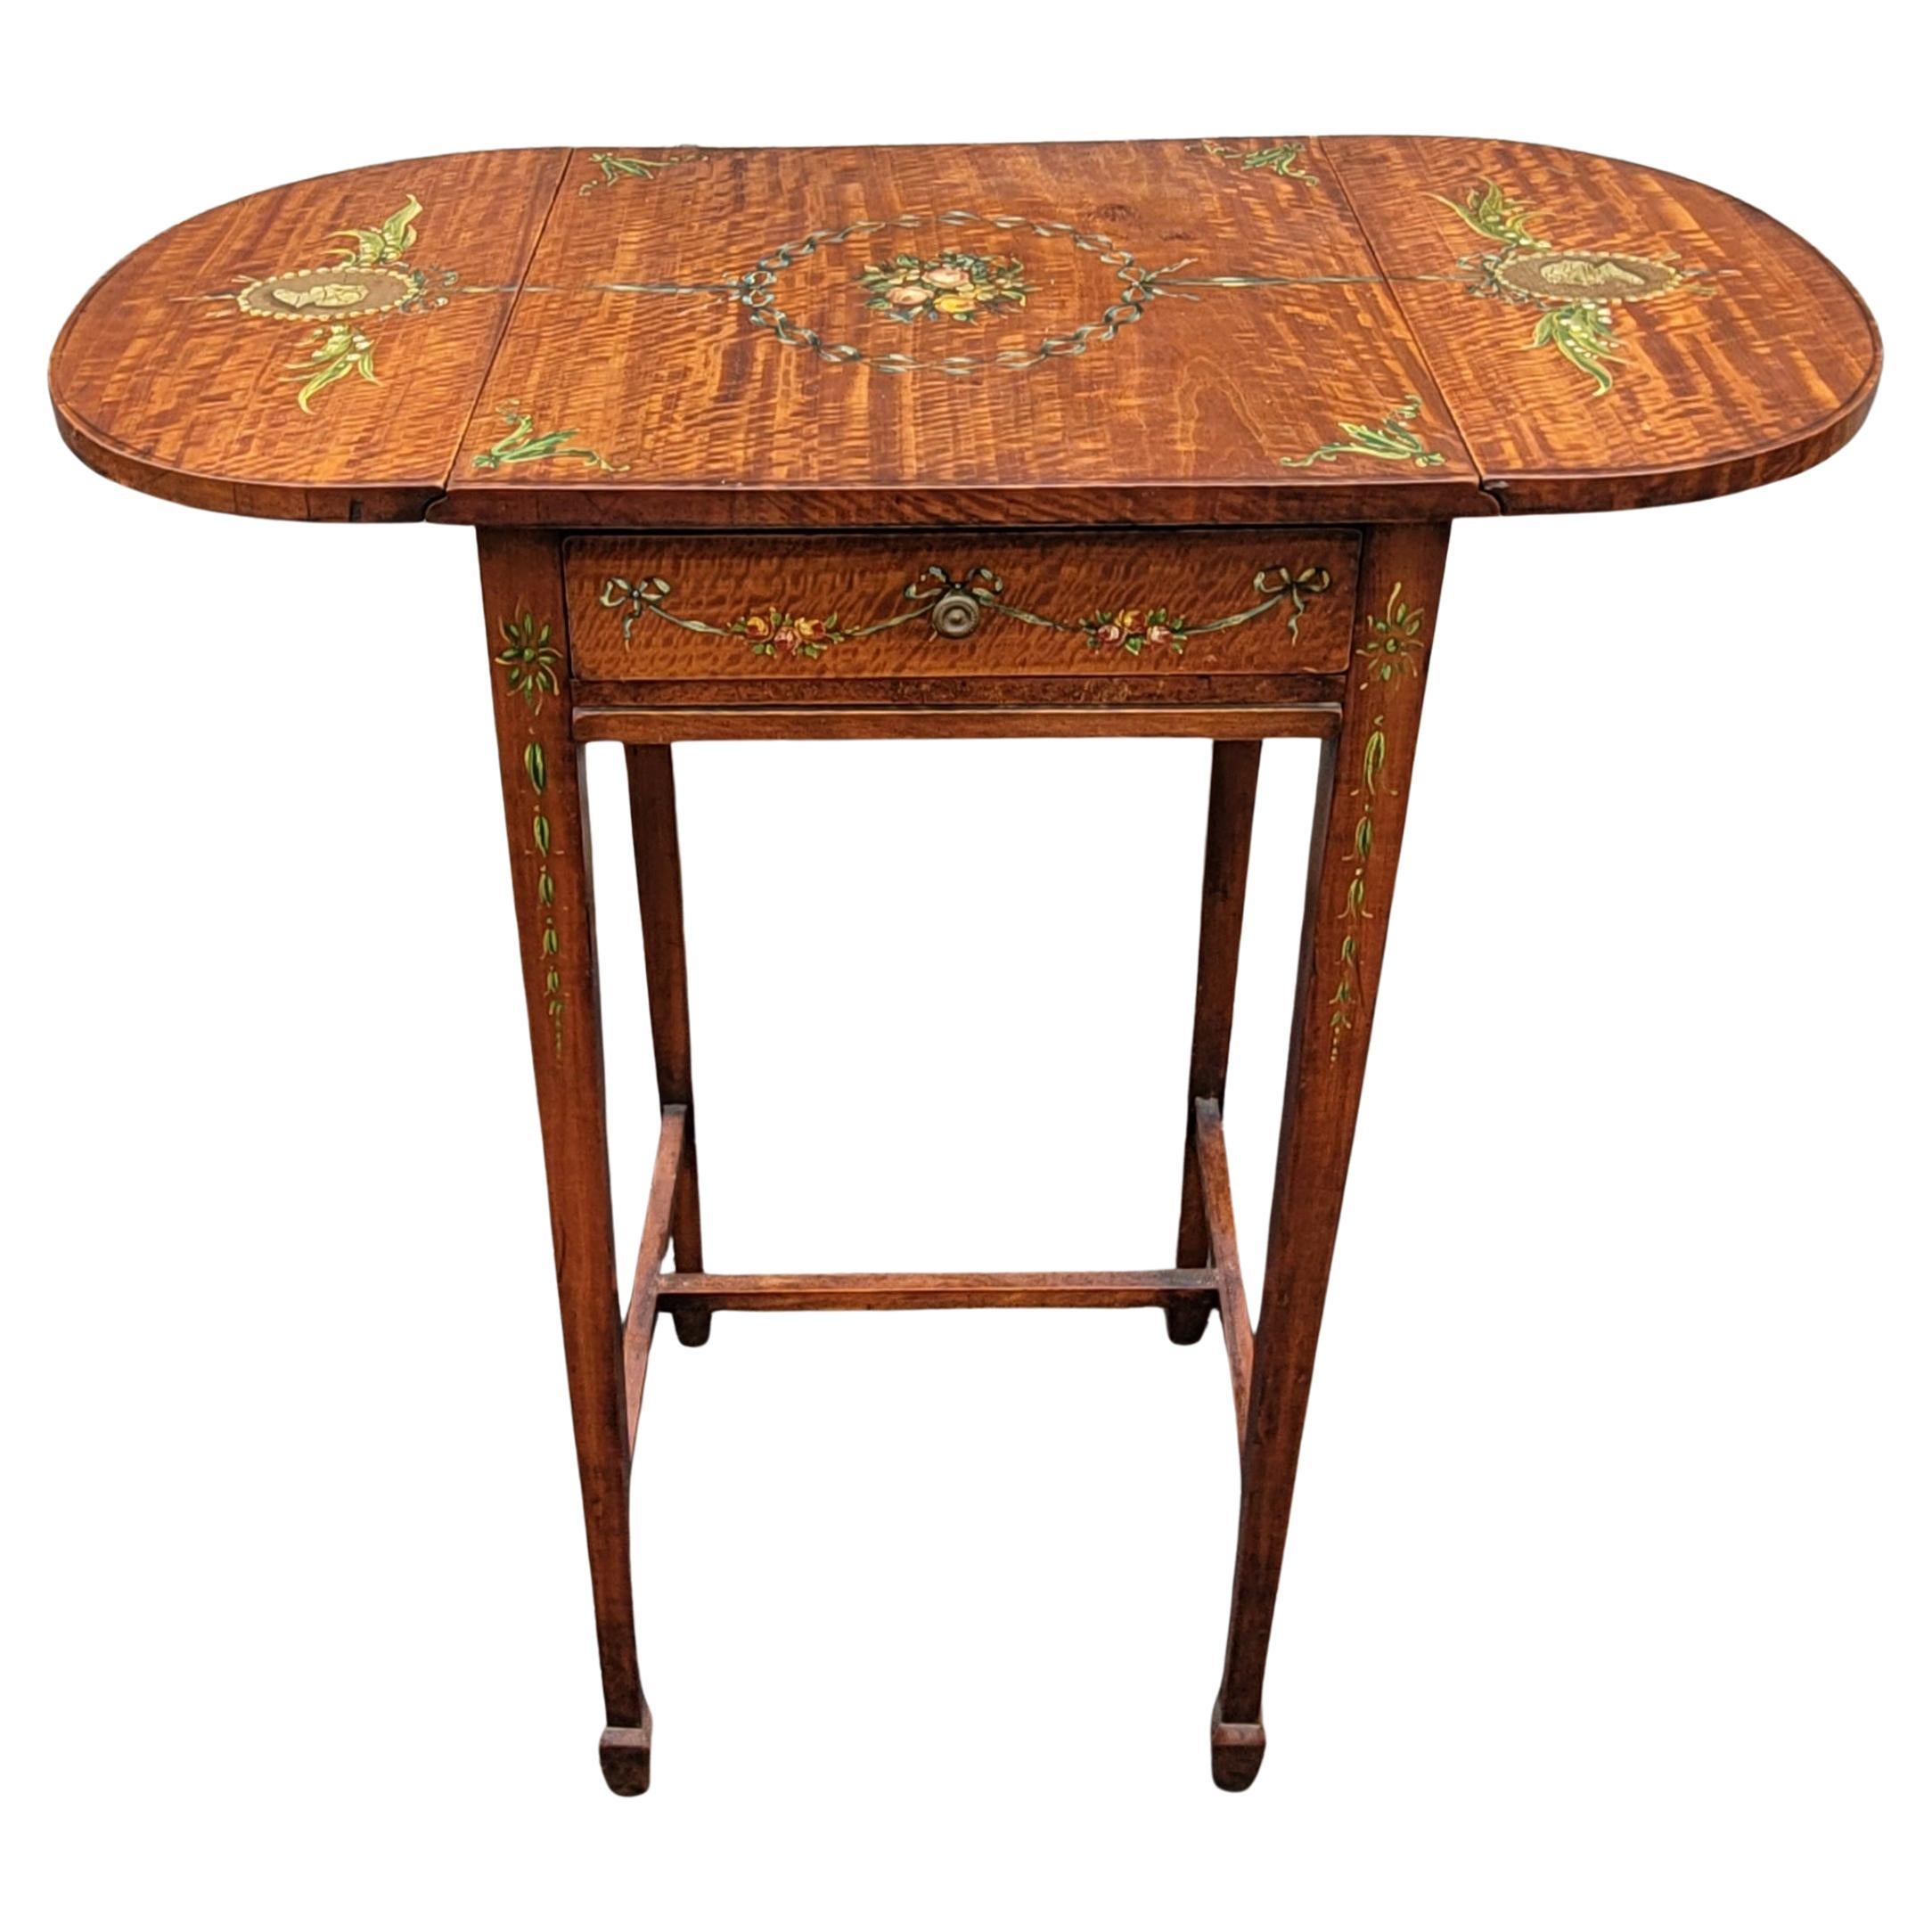 An incredibly Refinished 1930s Dropleaf Pembroke Table with a very skillfully gorgeius hand painting work. Will sparkle any room.
Measures 26